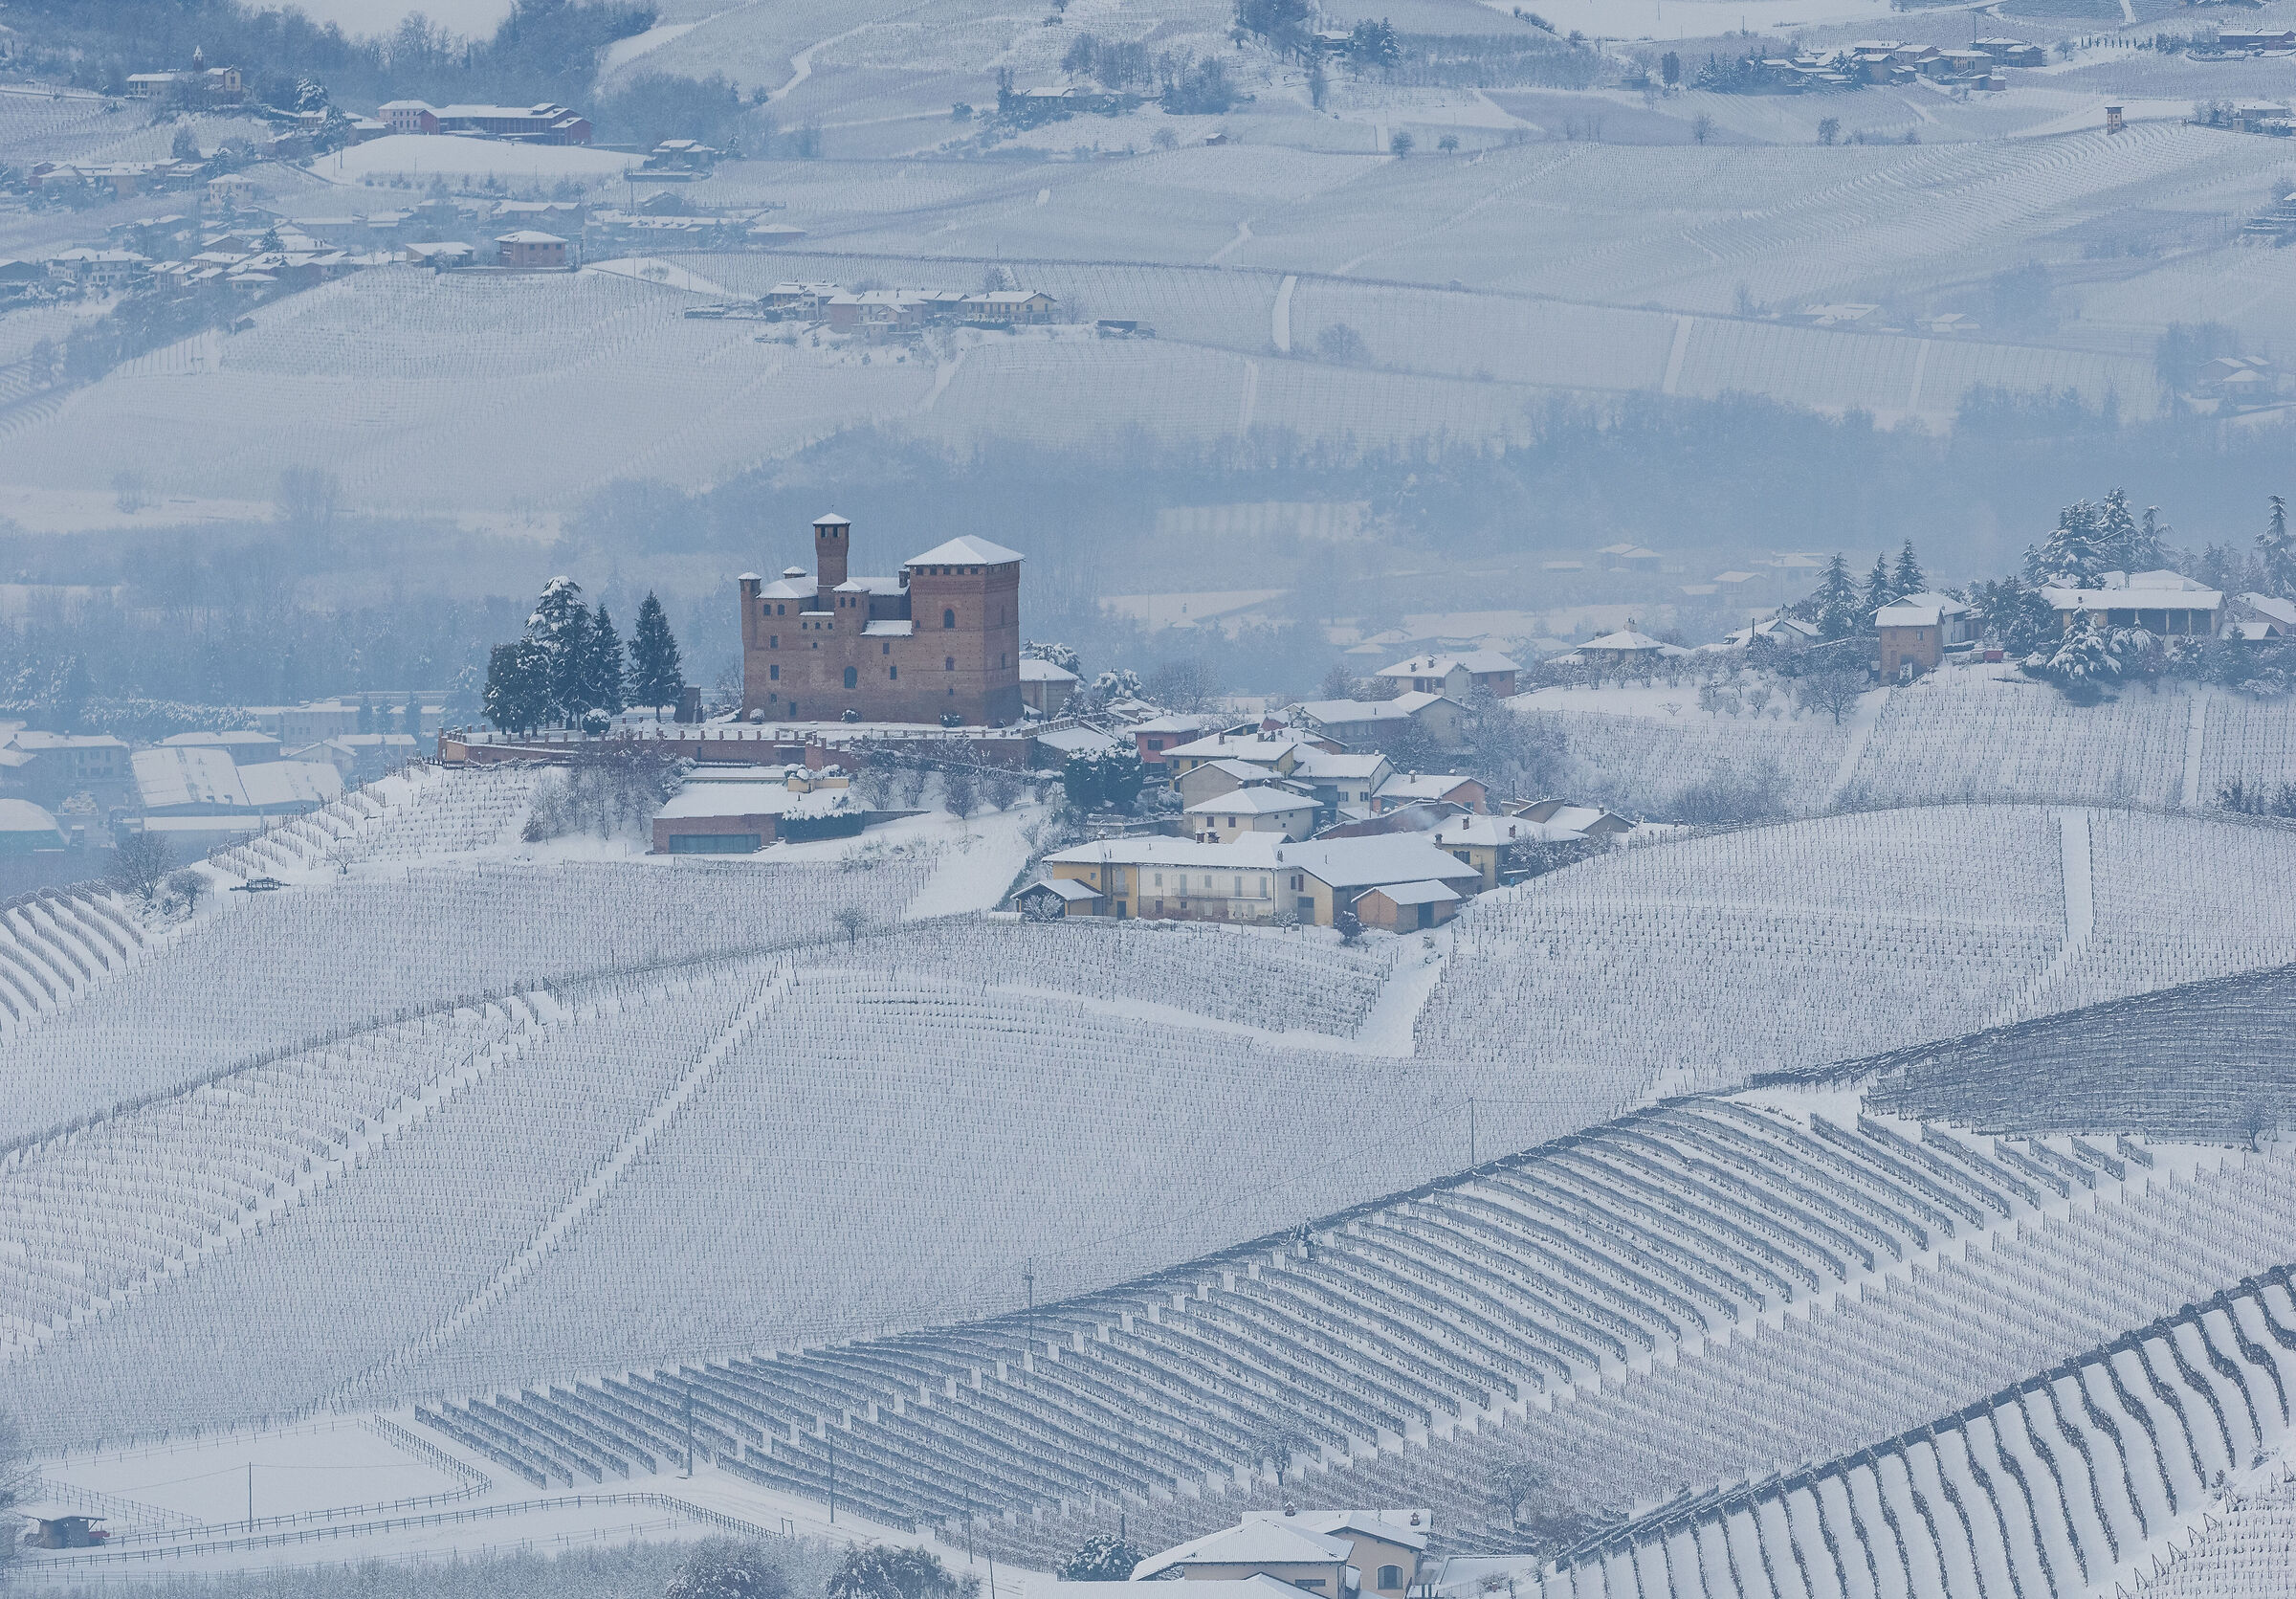 the Castle of Grinzane Cavour and the winter vineyards...